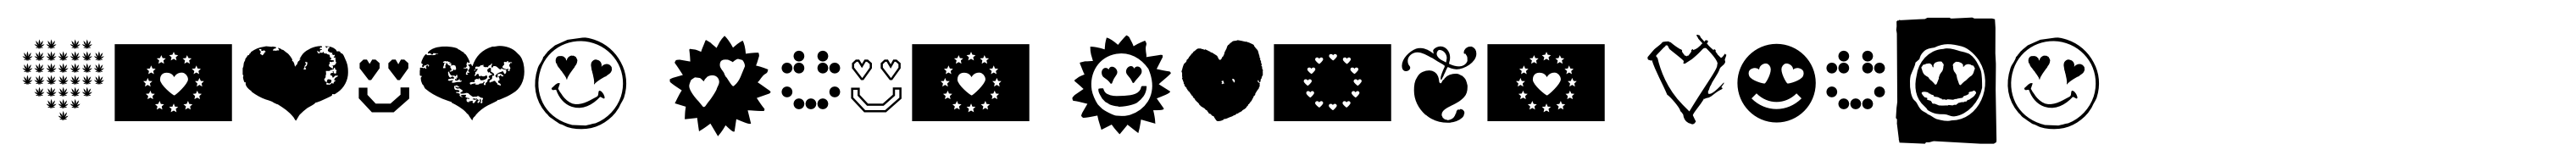 Hearts Love Smile Icons